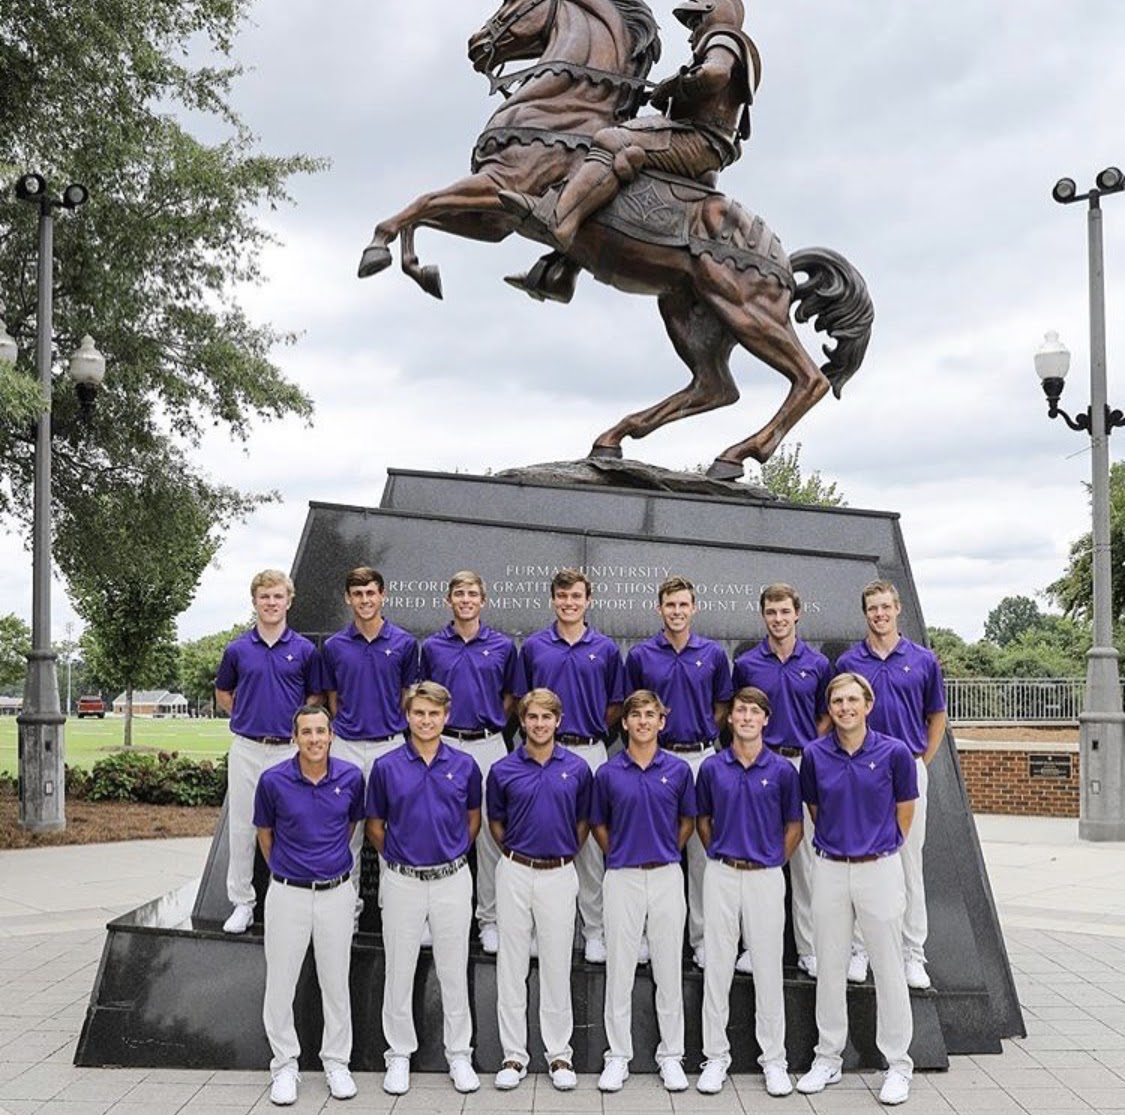 Men’s Golf Roster 2019-2020 season. The team will look to “adapt and overcome” the obstacles that Covid-19 has given.